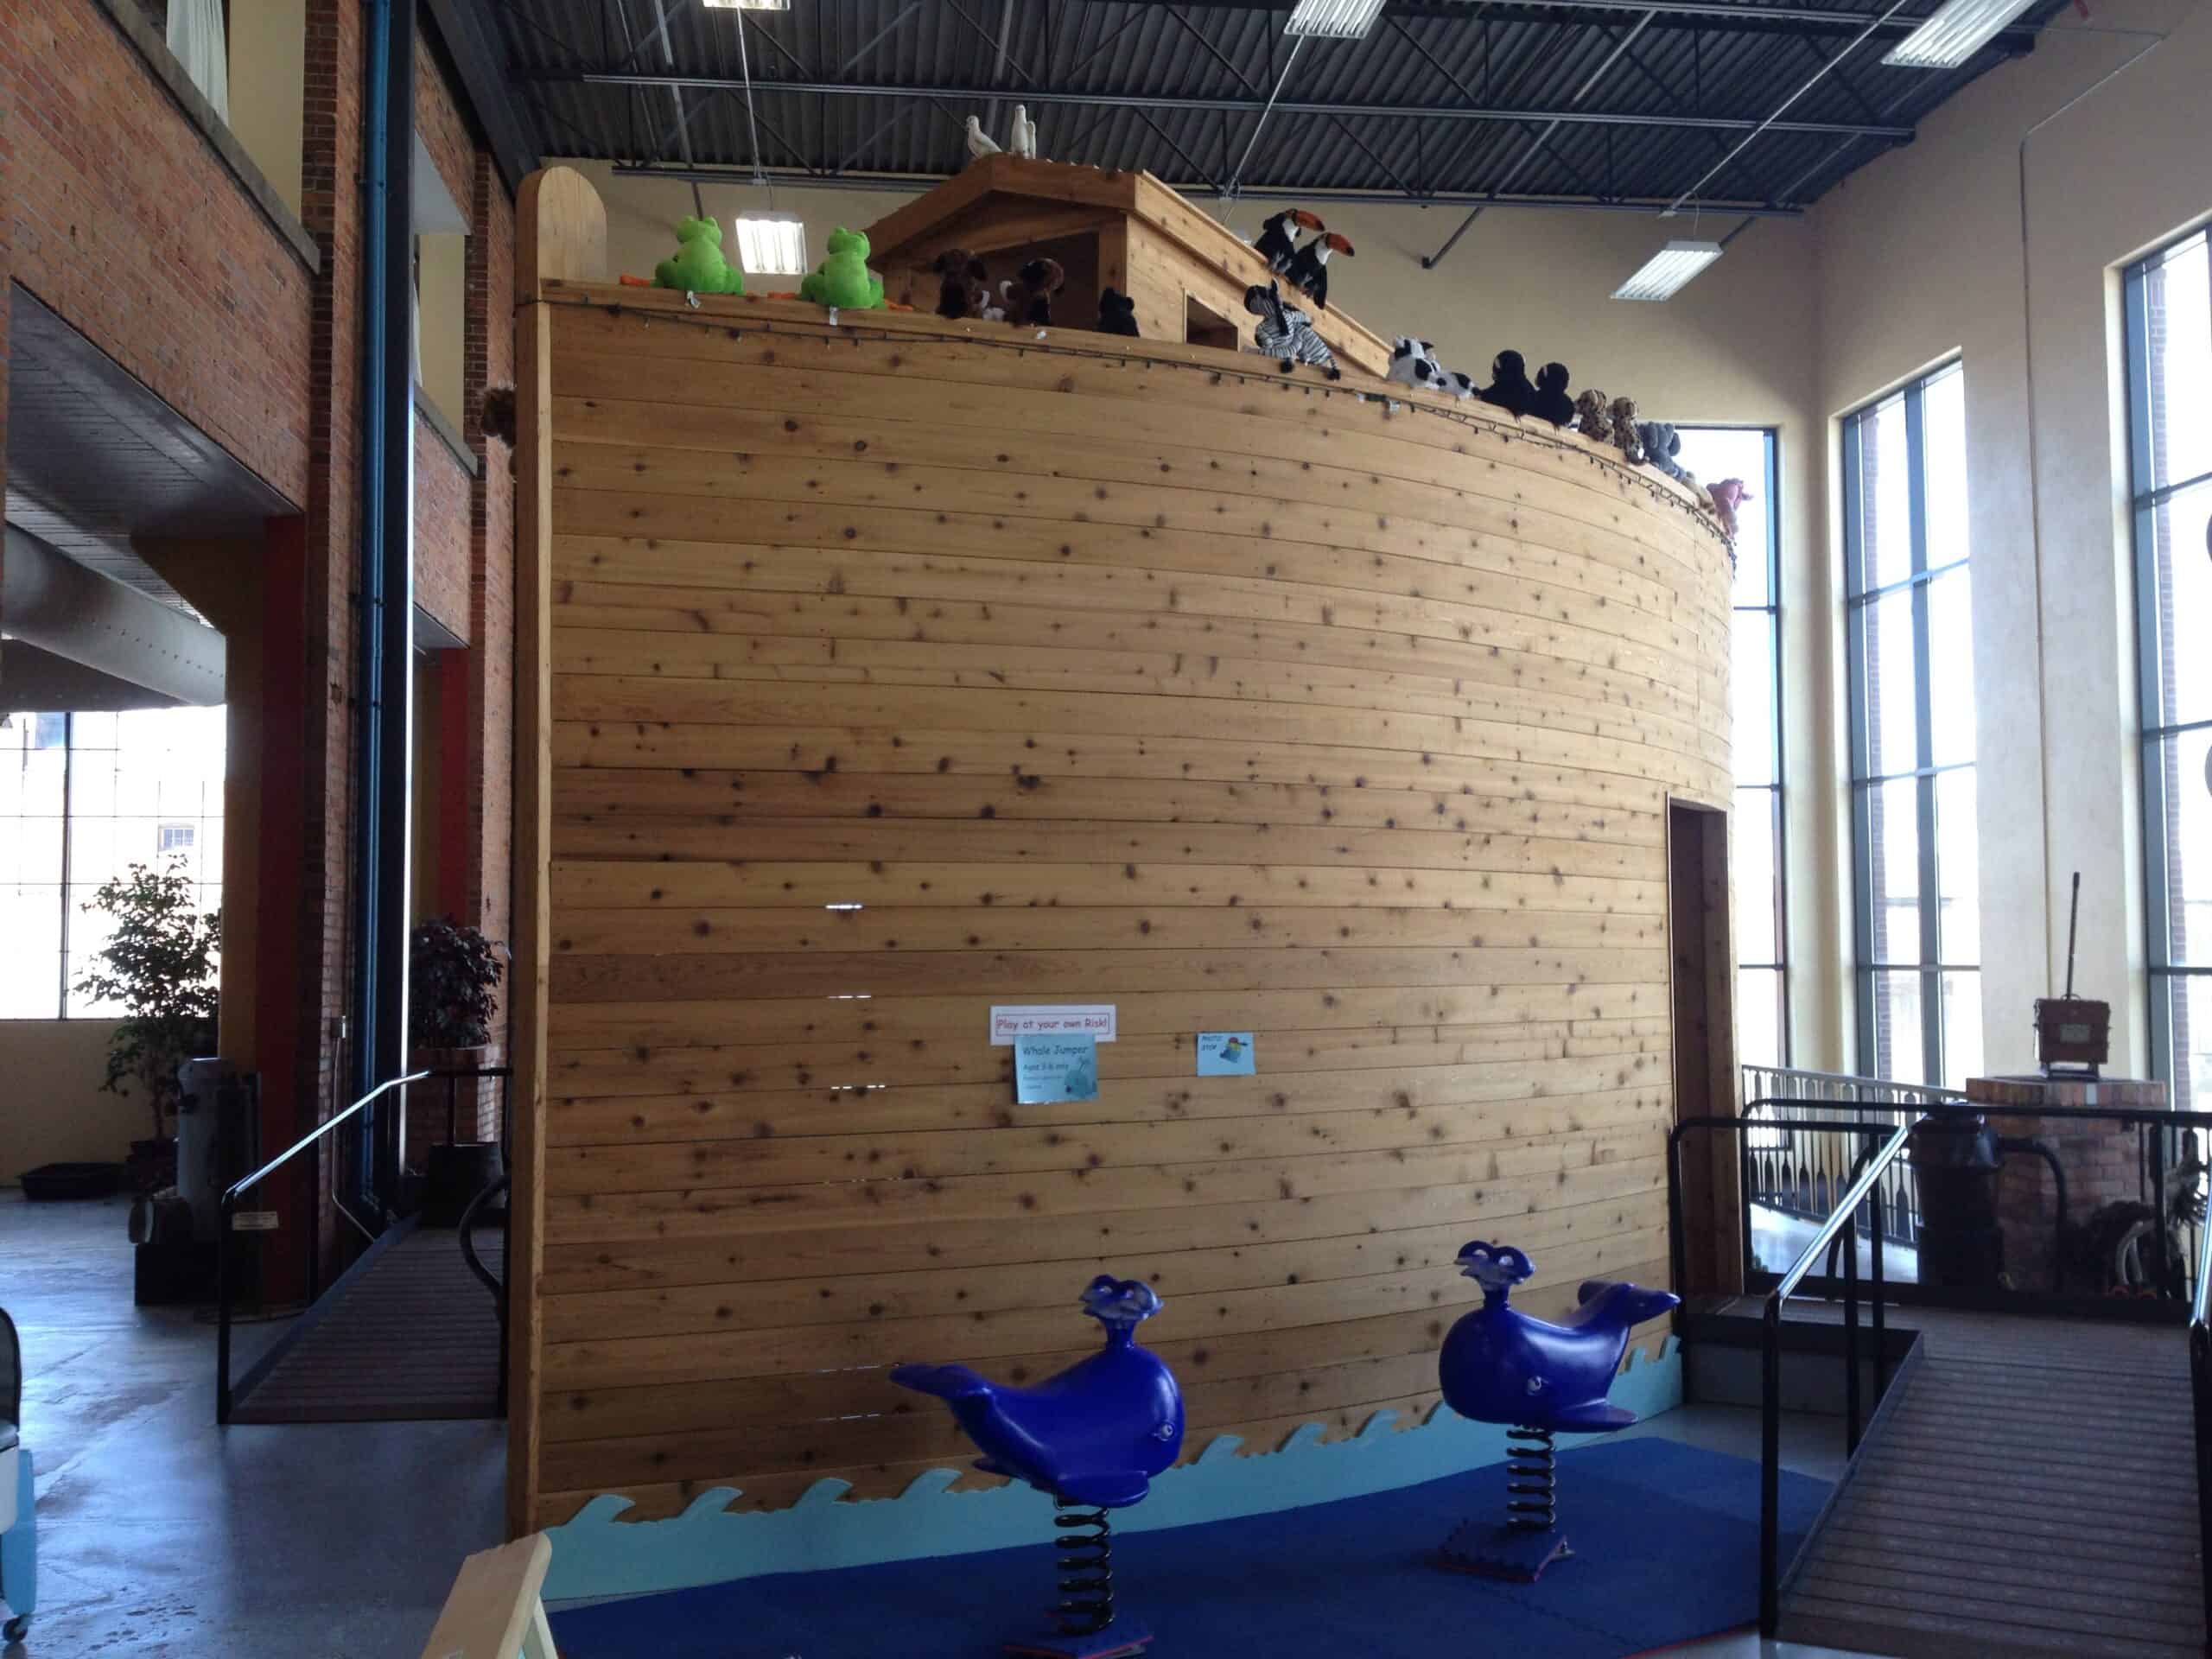 At the Museum of Clean, the water exhibits are in a big ark by Ethan Prater